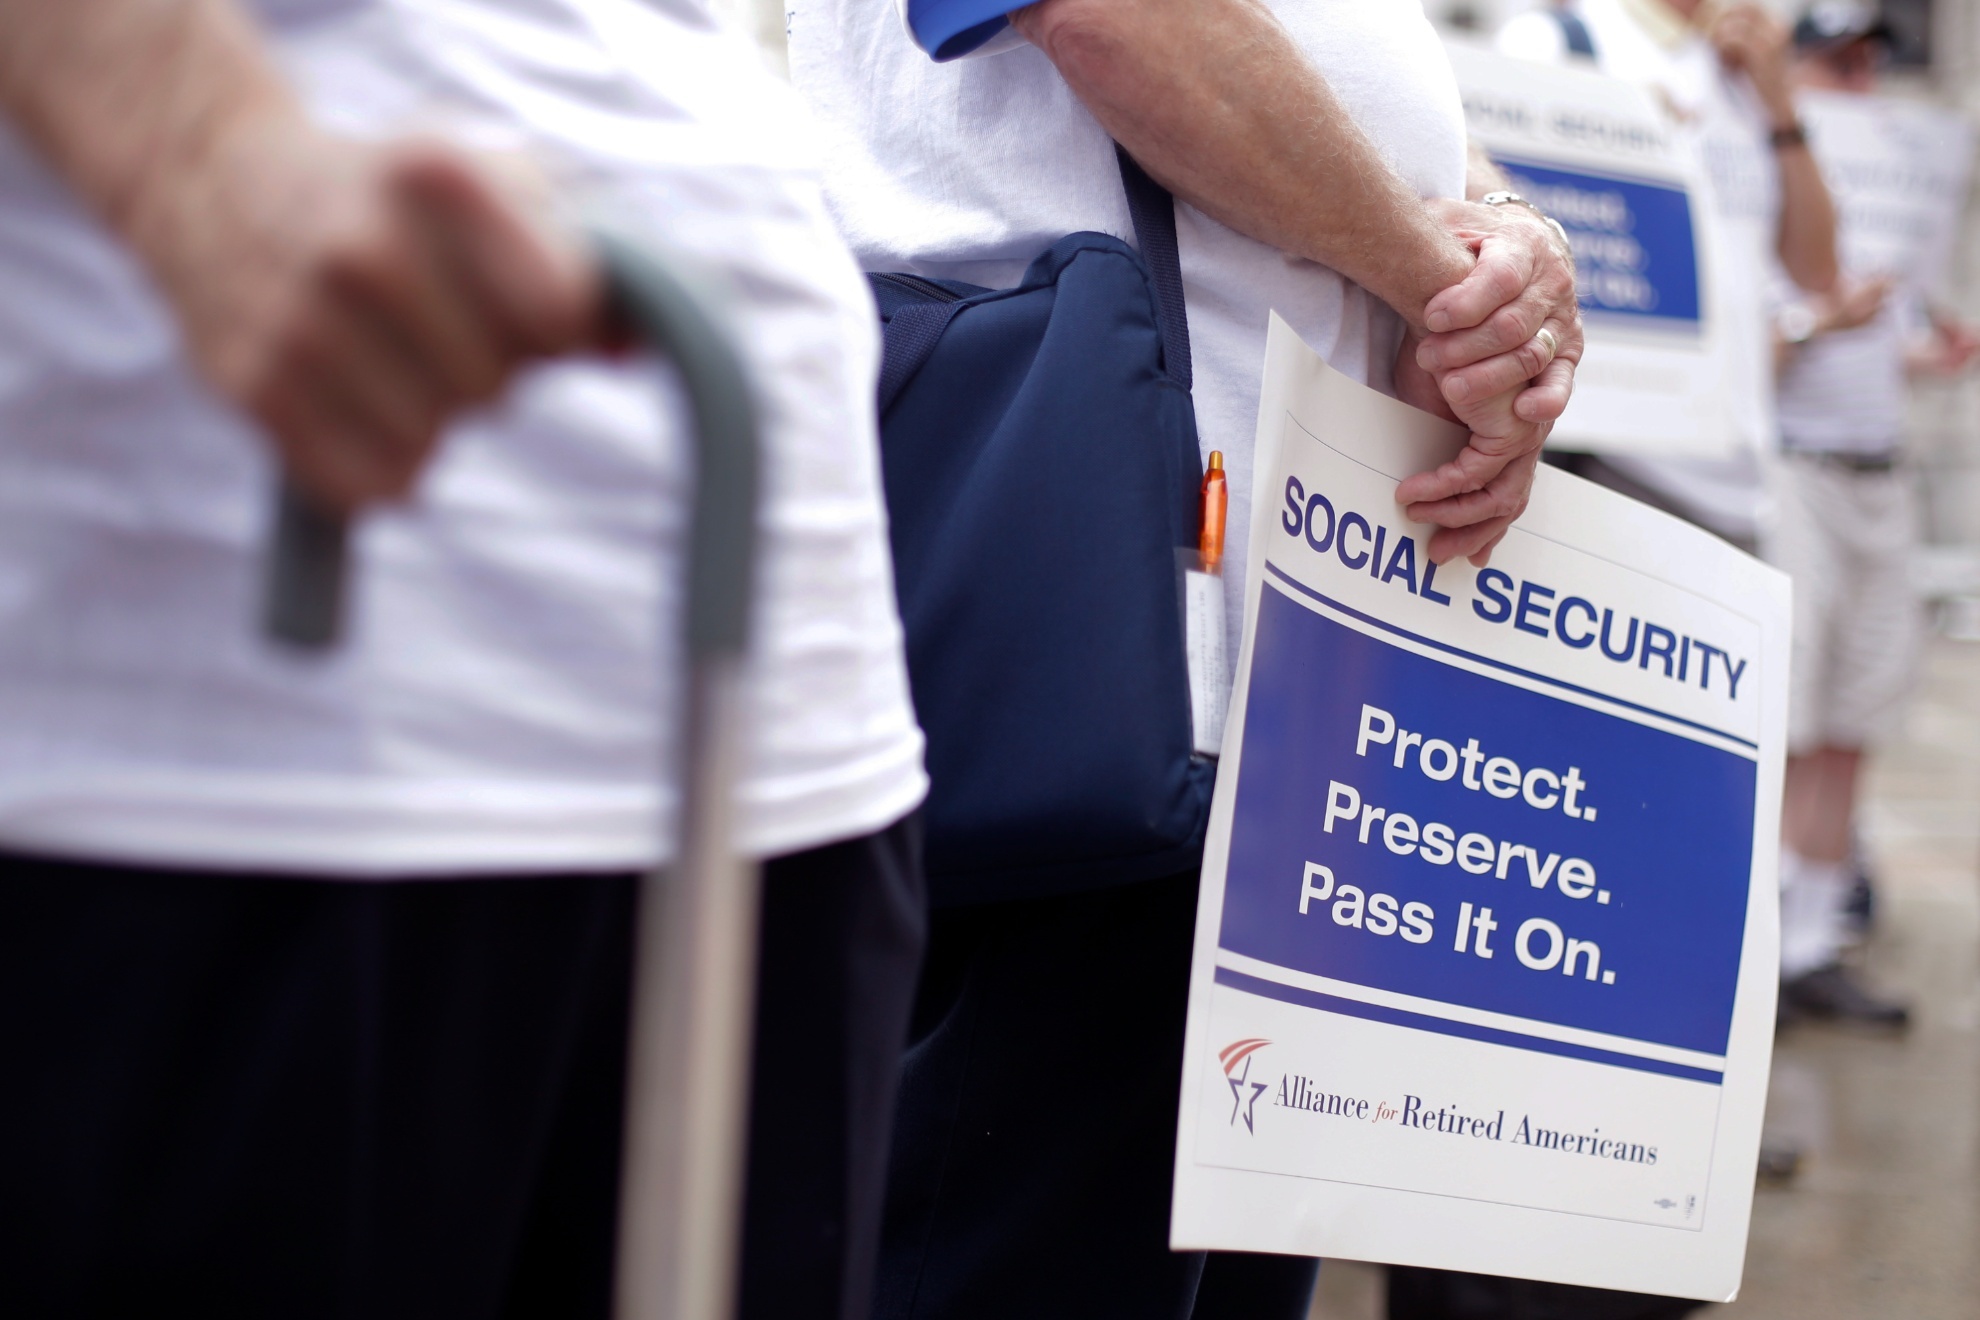 ocial Security Disability Insurance (SSDI) program offers help to millions of Americans.